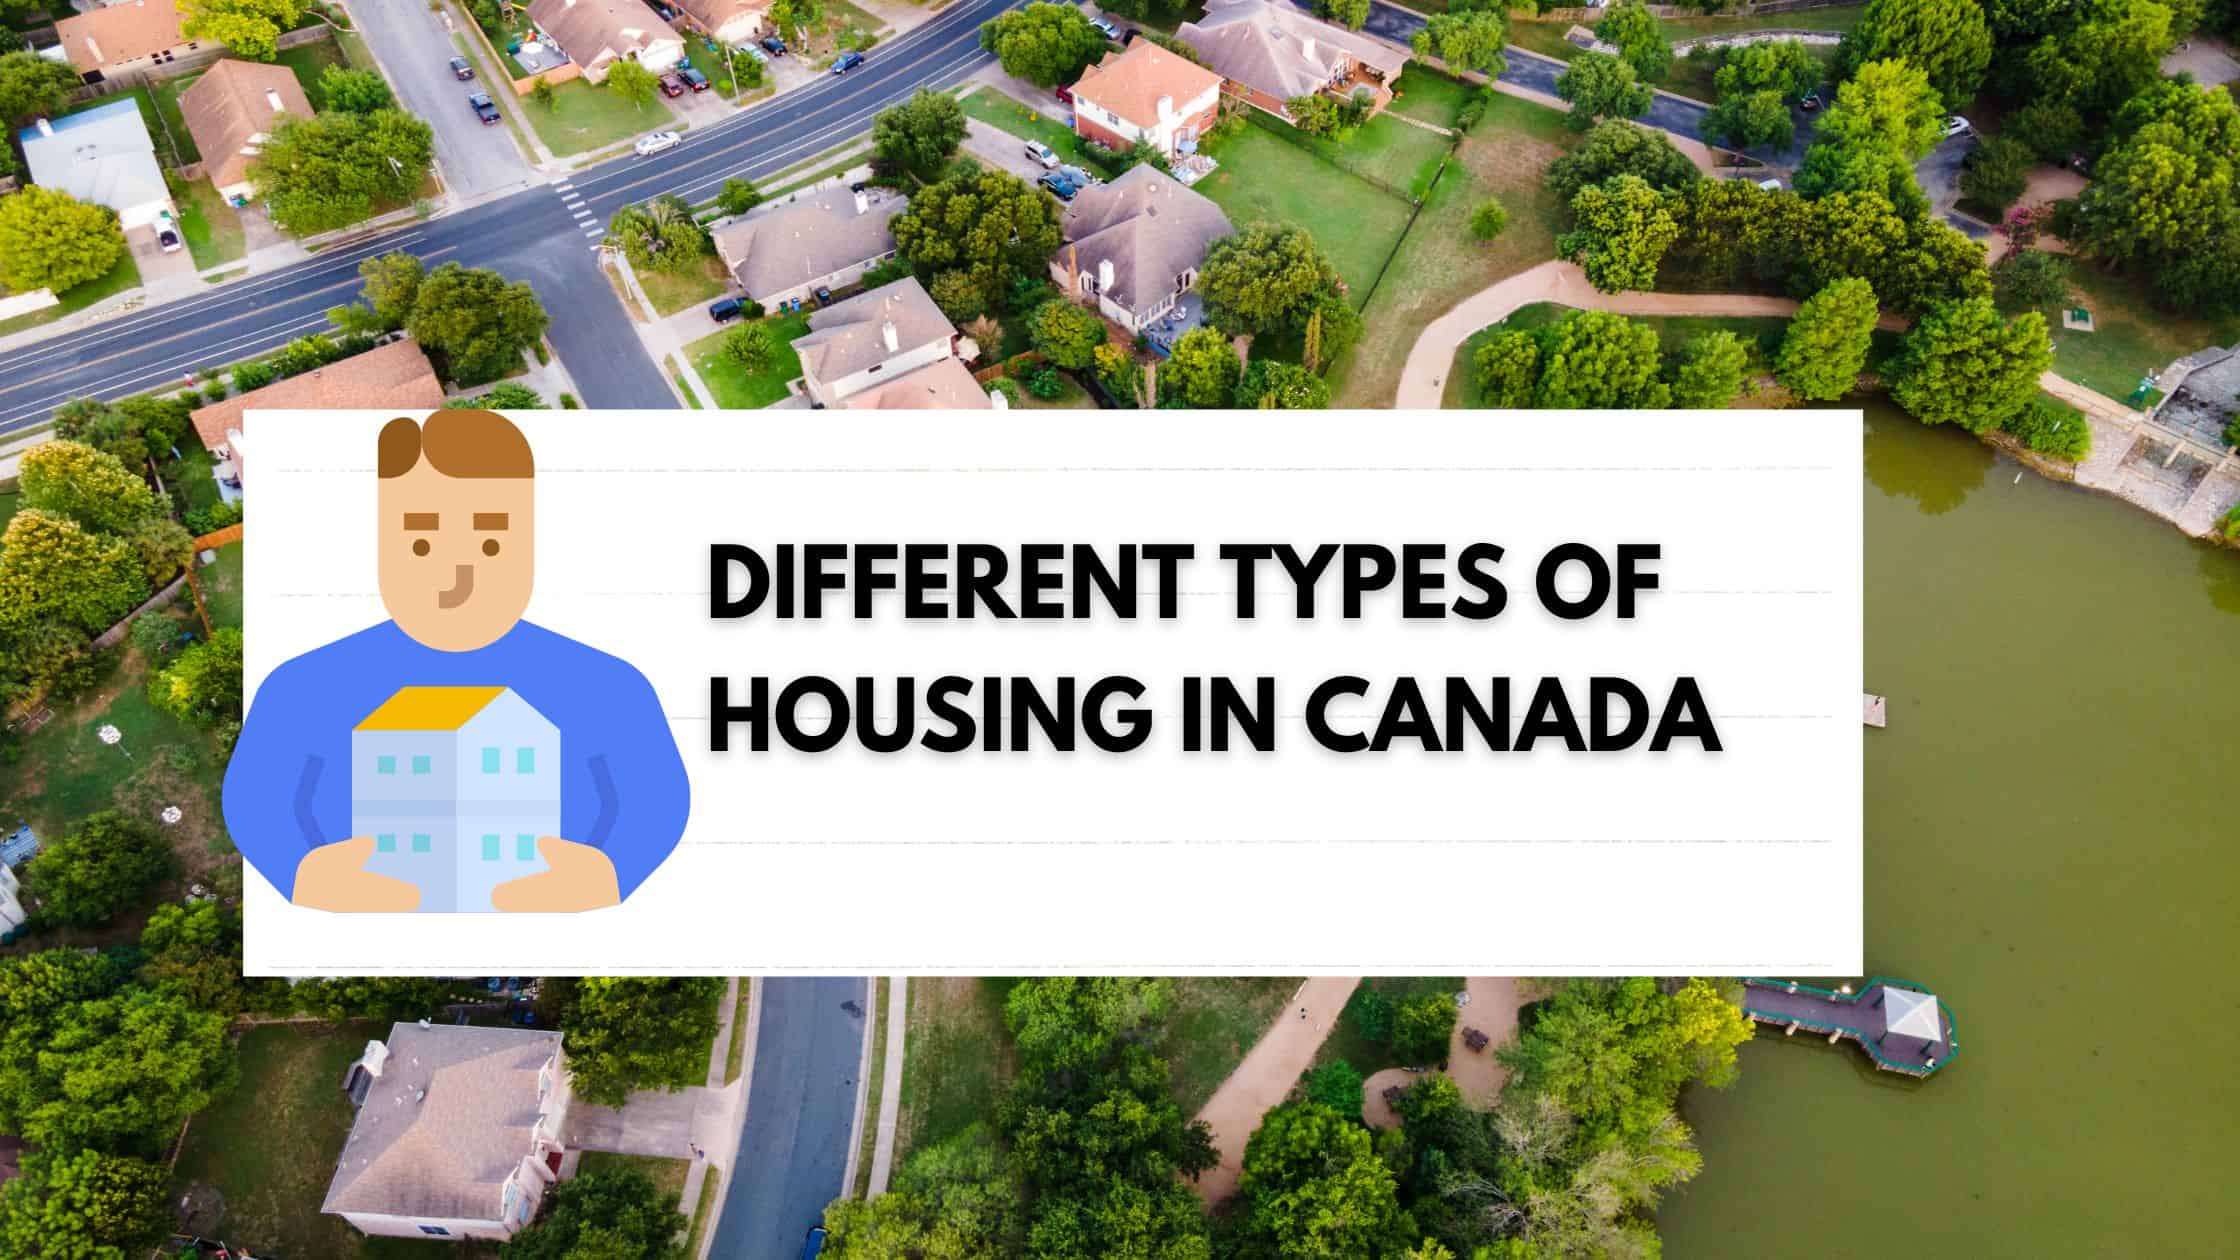 Different types of housing in Canada